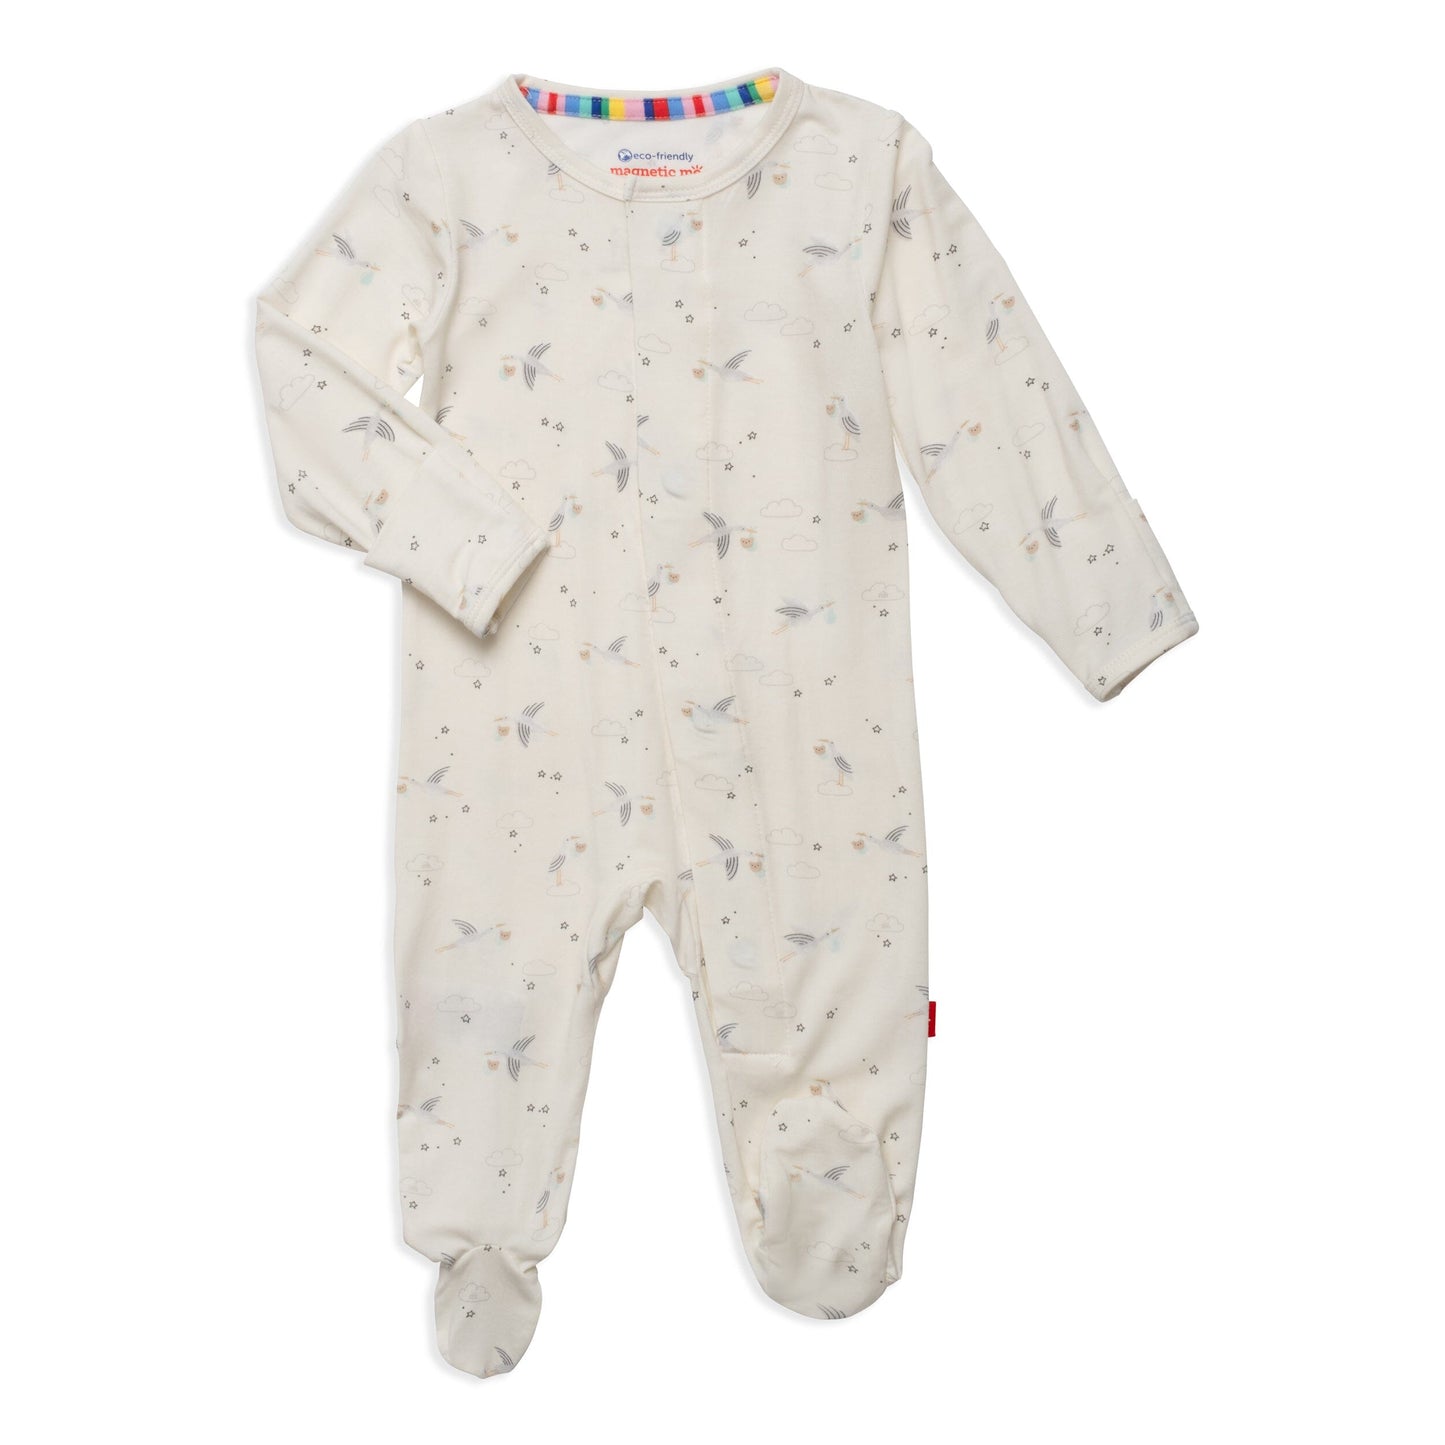 Beary Special Delivery Footie 130 BABY BOYS/NEUTRAL APPAREL Magnetic Me 